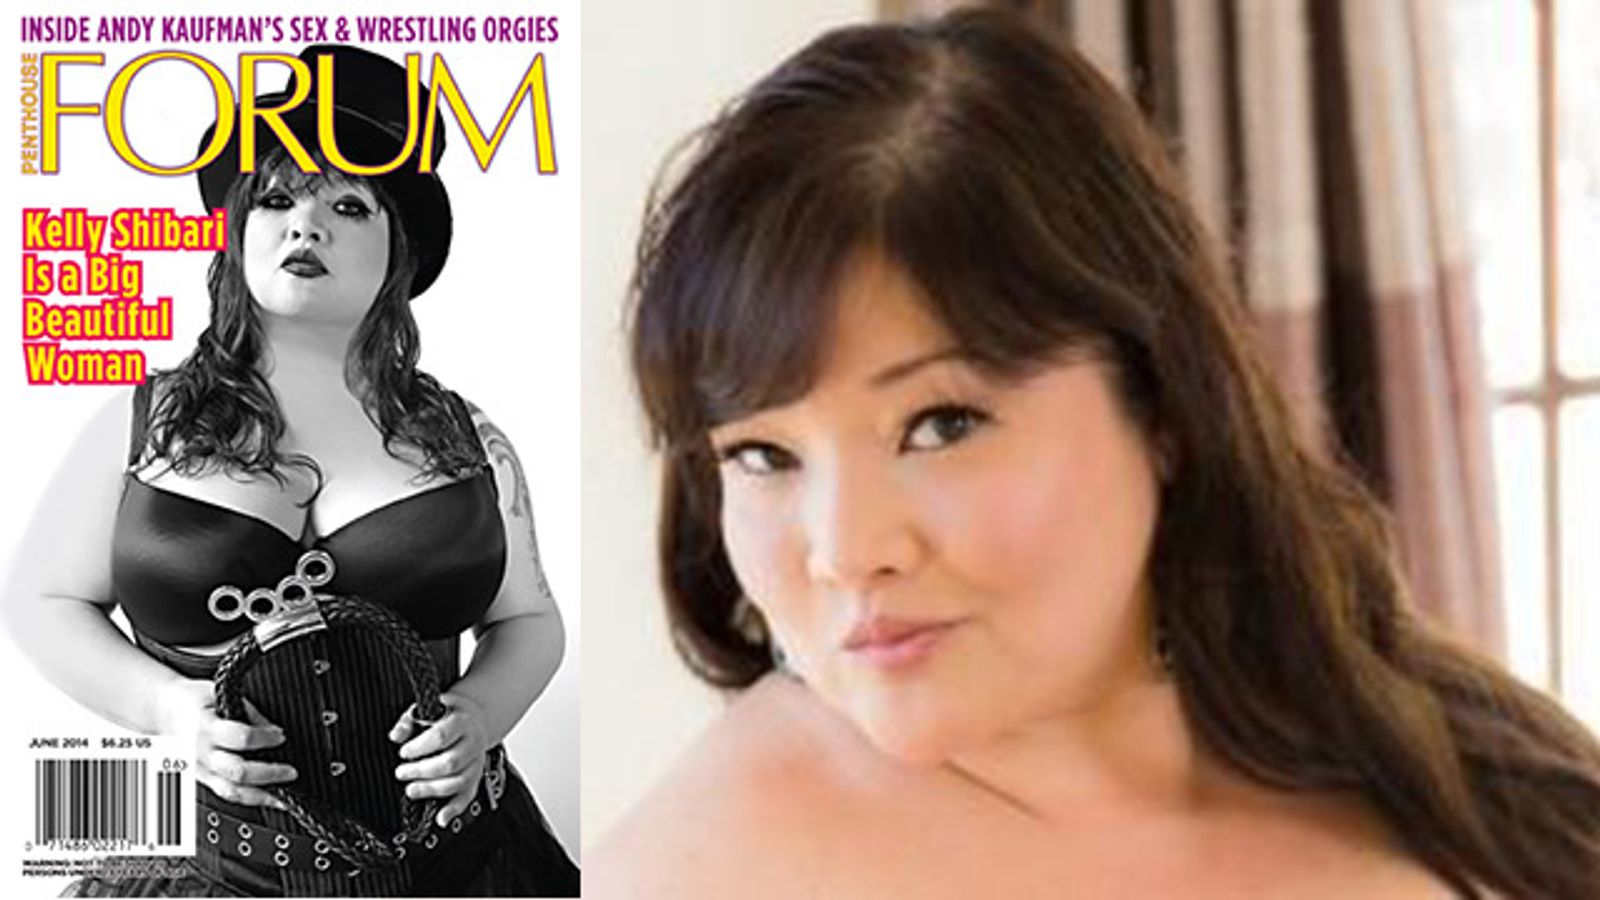 Kelly Shibari Hosts Penthouse Forum Twitter Chat August 13